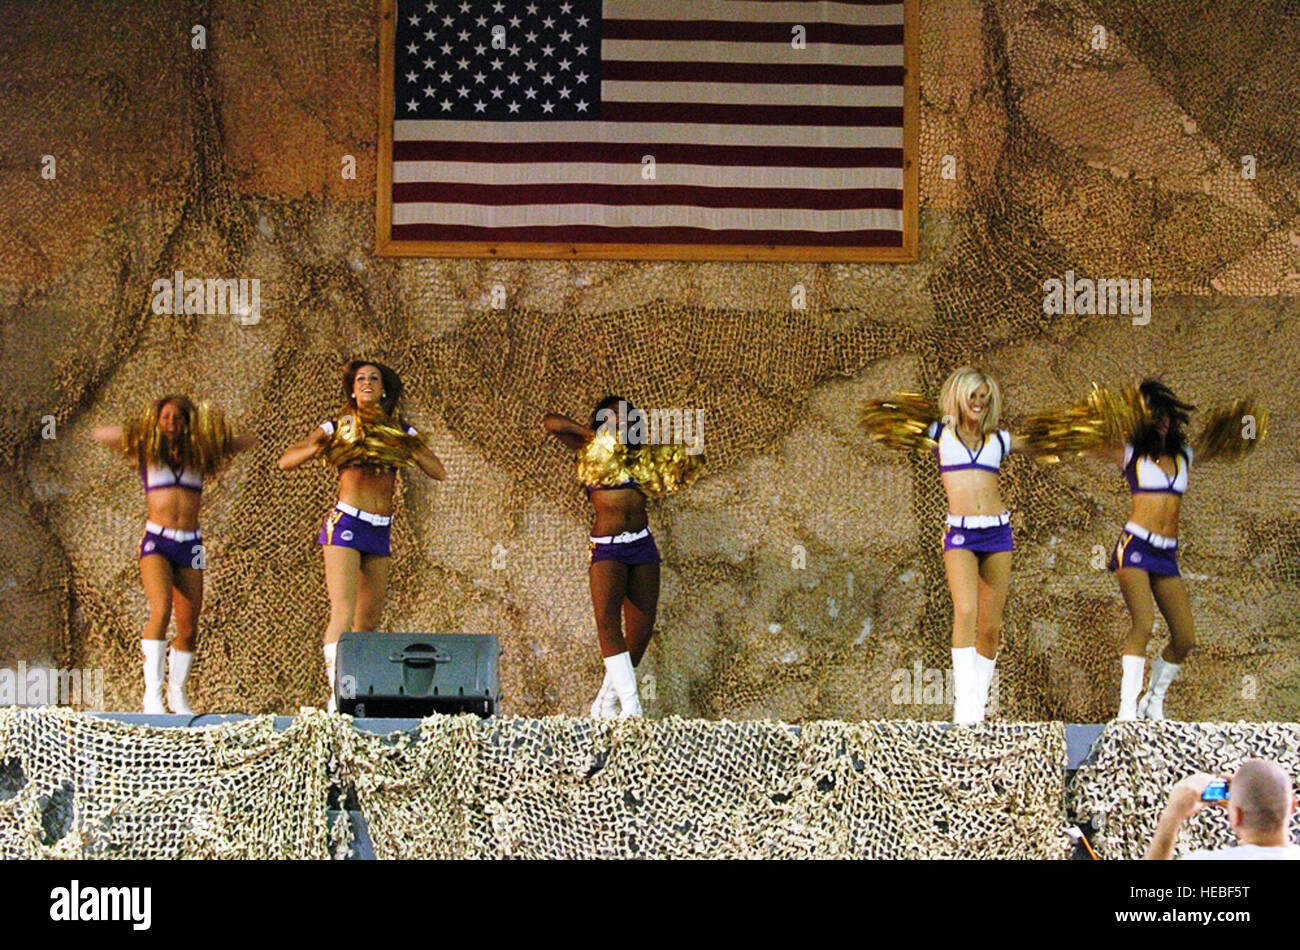 Minnesota Viking cheerleaders Jessie, Sarah, Amanda, Peyton and Bailey perform a dance routine during the Viking cheerleaders’ tour at Bagram Airfield, Afghanistan, May 19. The ladies visited BAF with a promise to give their all and to help pump up the spirits of deployed servicemembers. (U.S. Army photo/Tech. Sgt. Kevin Wallace) Stock Photo